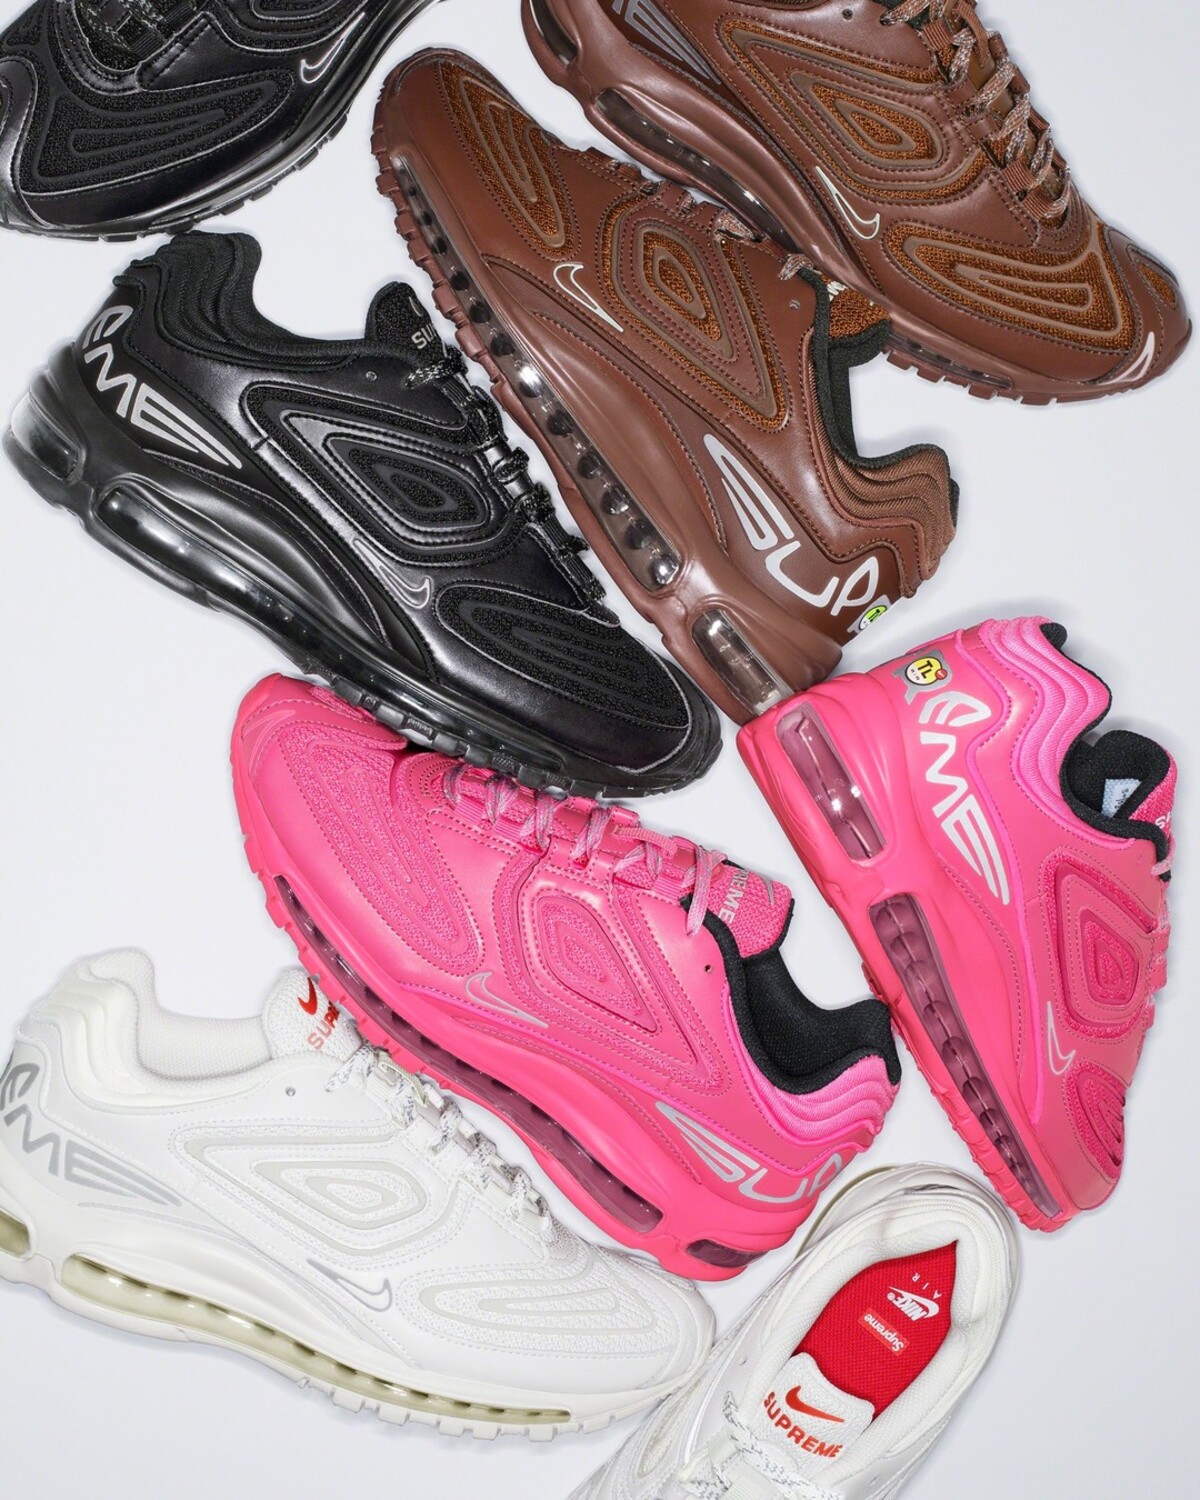 Supreme Tap Nike Yet Again for Air Max 98 TL Collaboration – PAUSE